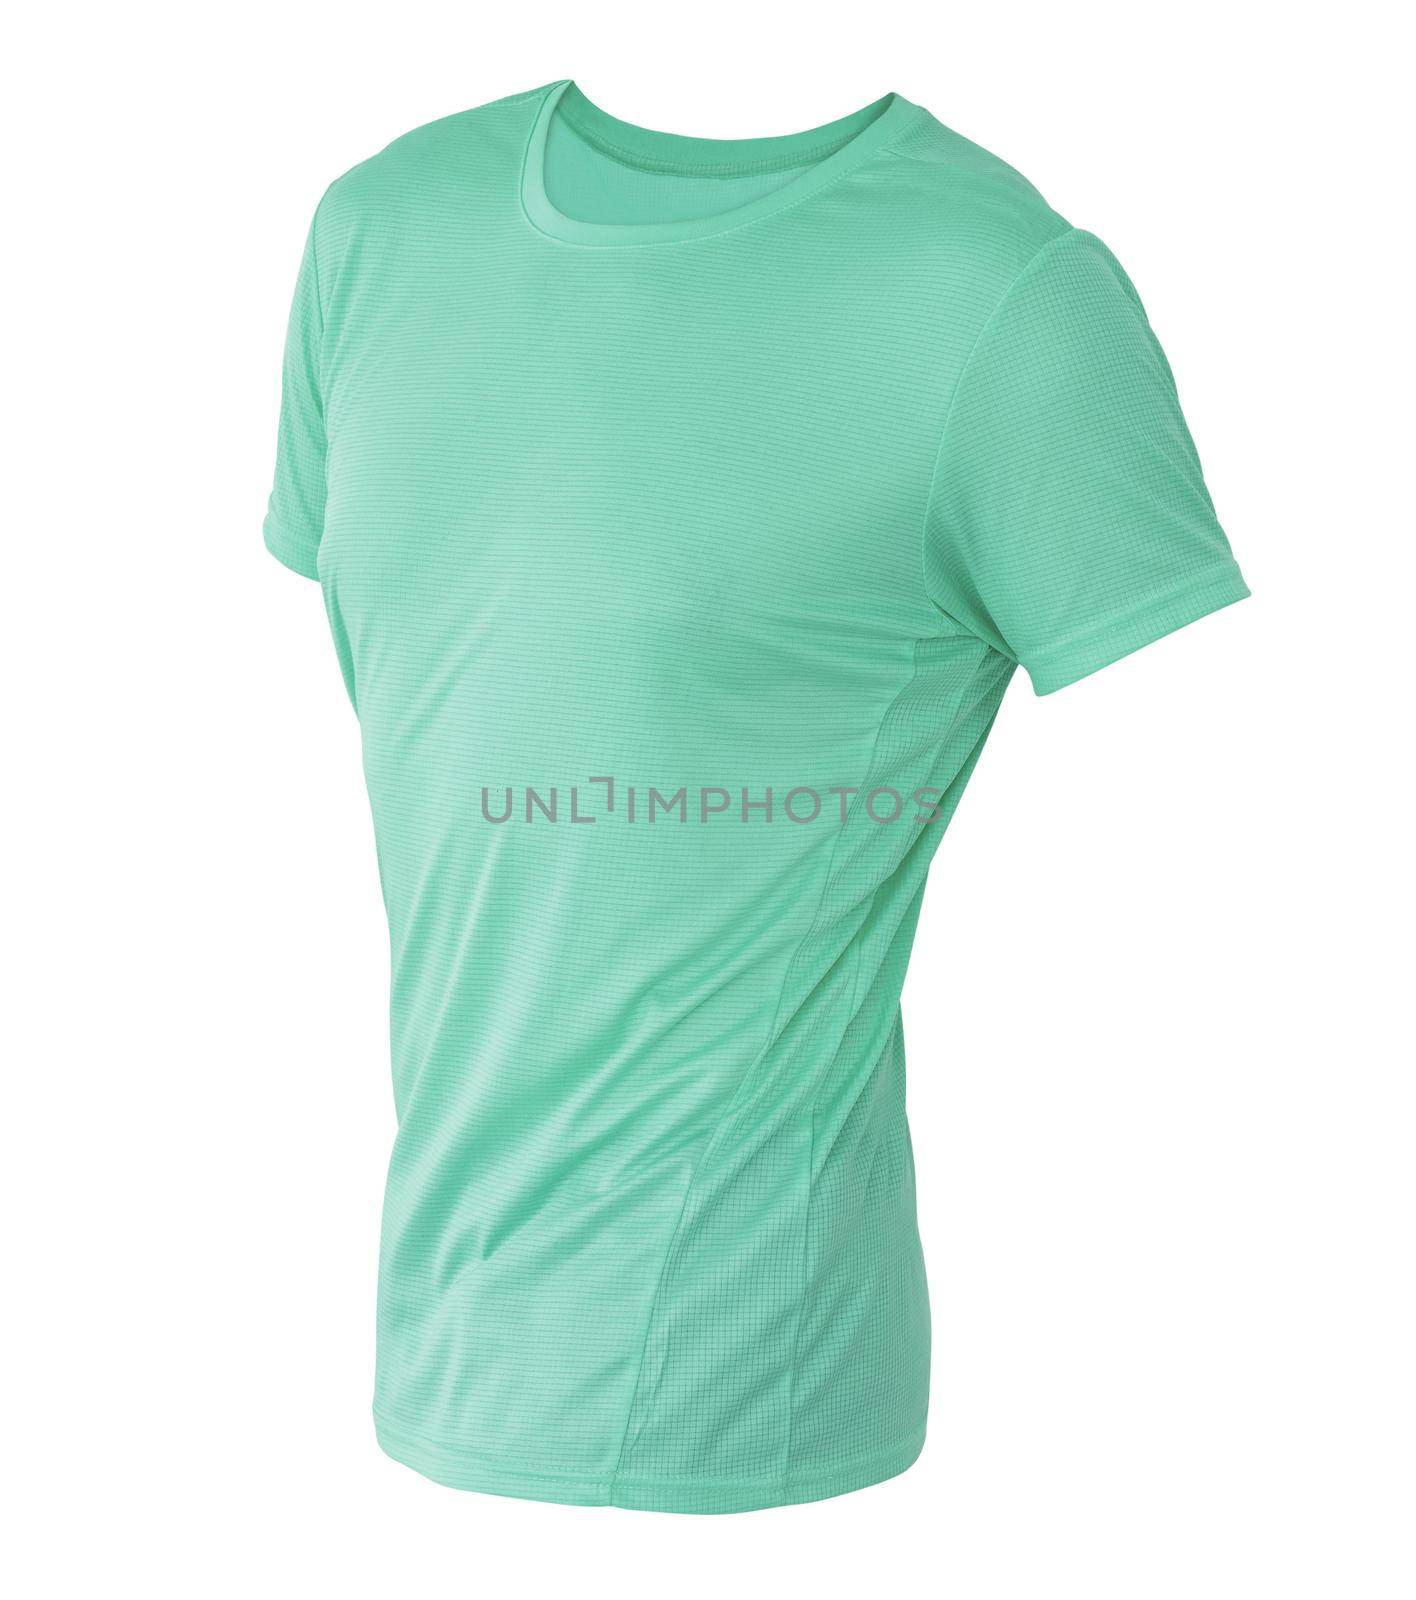 Yellow t-shirt template on invisible mannequin by GekaSkr